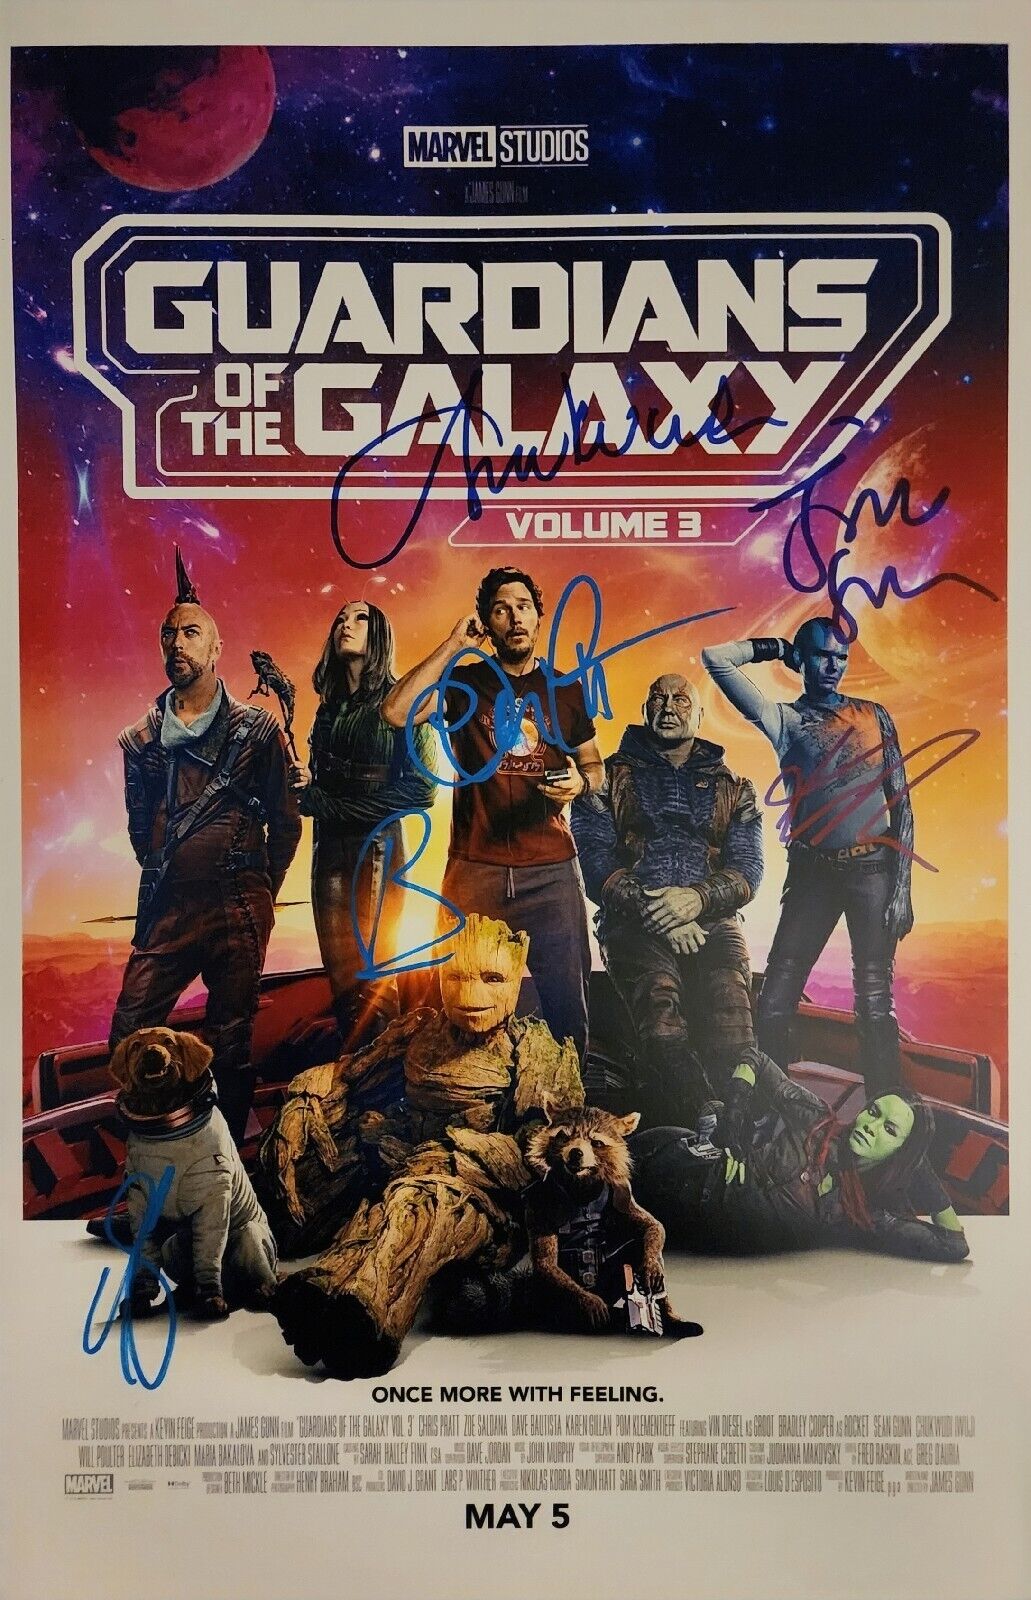 Most Valuable Guardians of the Galaxy Memorabilia: Signed Cast Poster